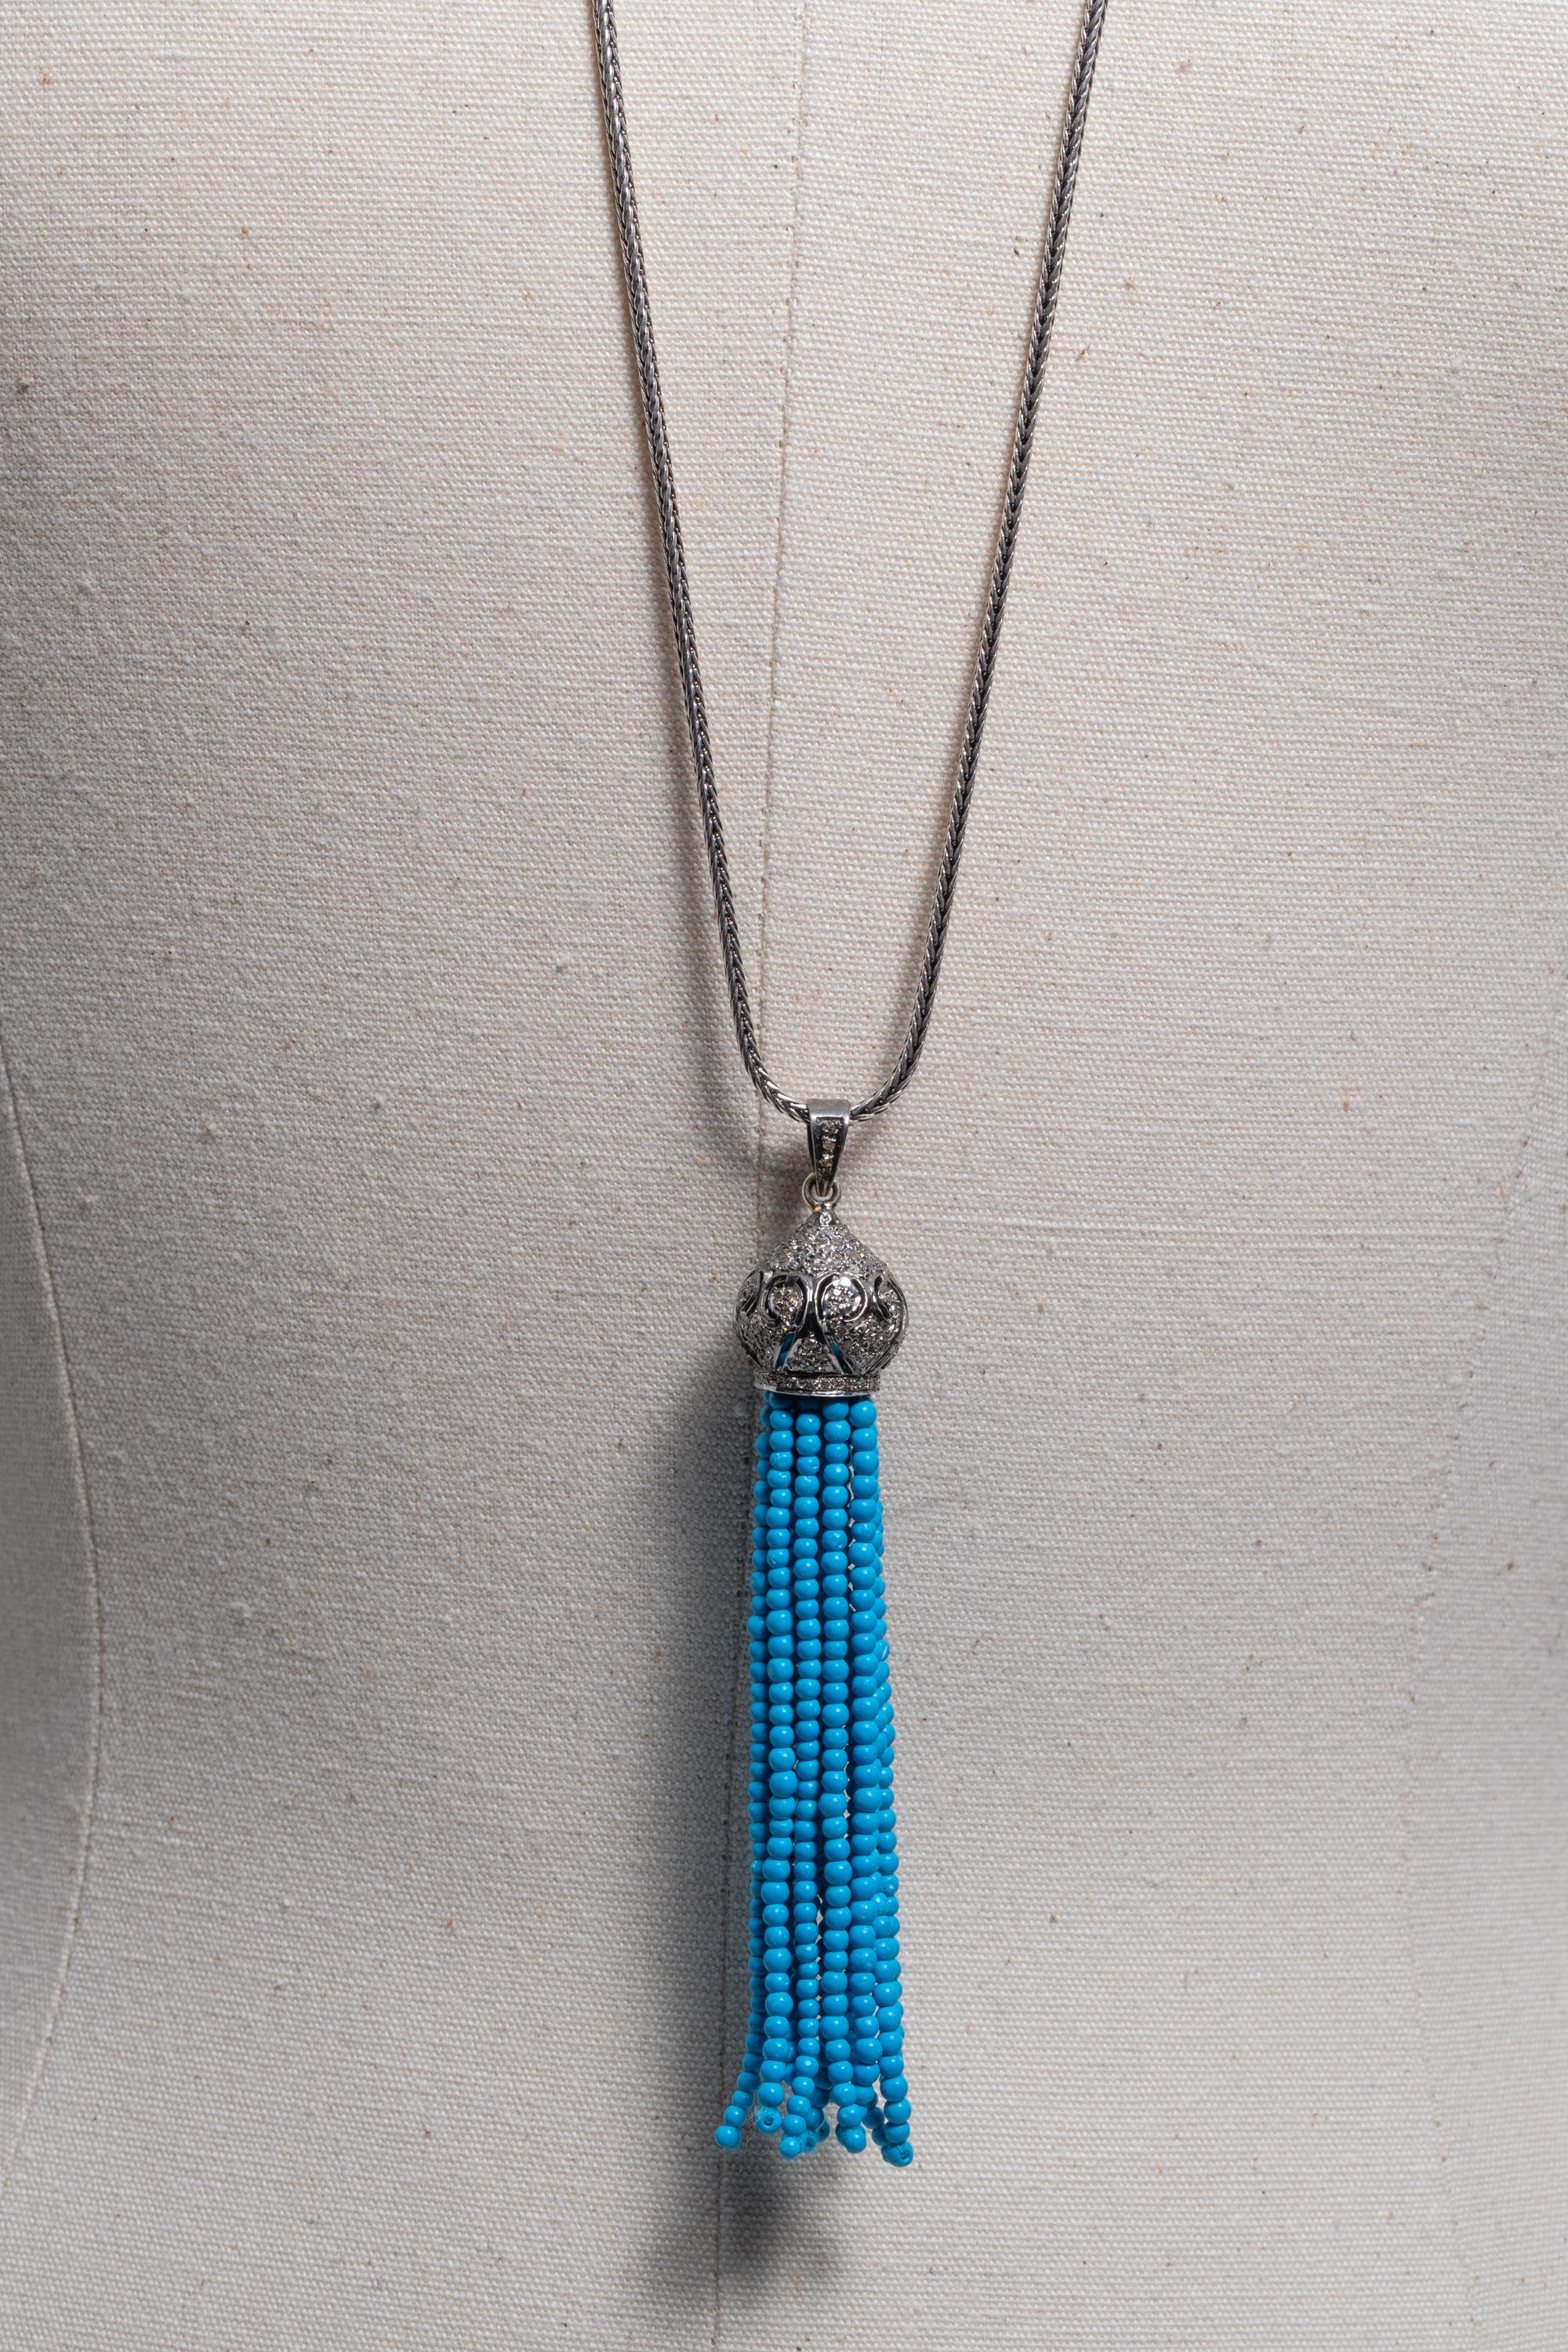 Round Cut Long Diamond and Turquoise Tassel Pendant Necklace on Sterling Silver Chain For Sale